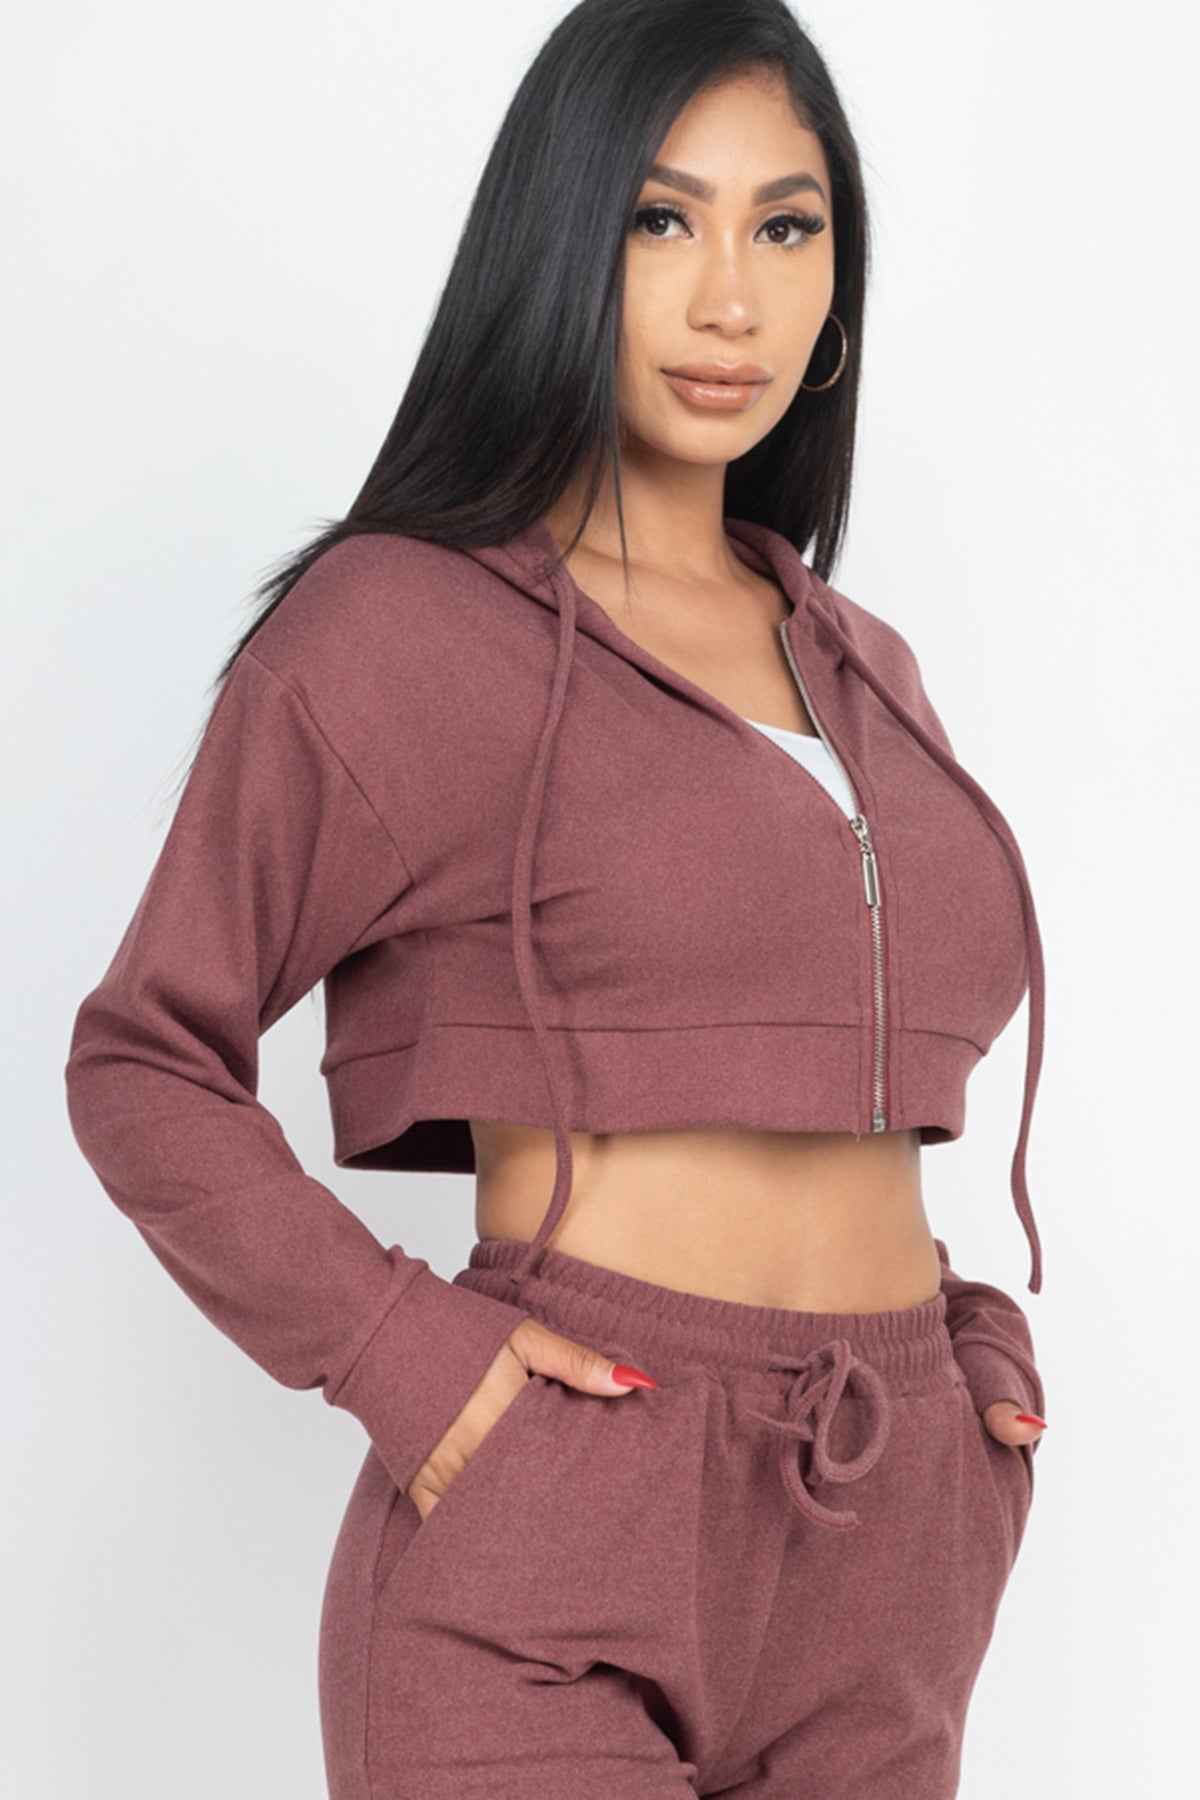 [$4/piece] Two Tone Rib Zip-up Cropped Hoodie